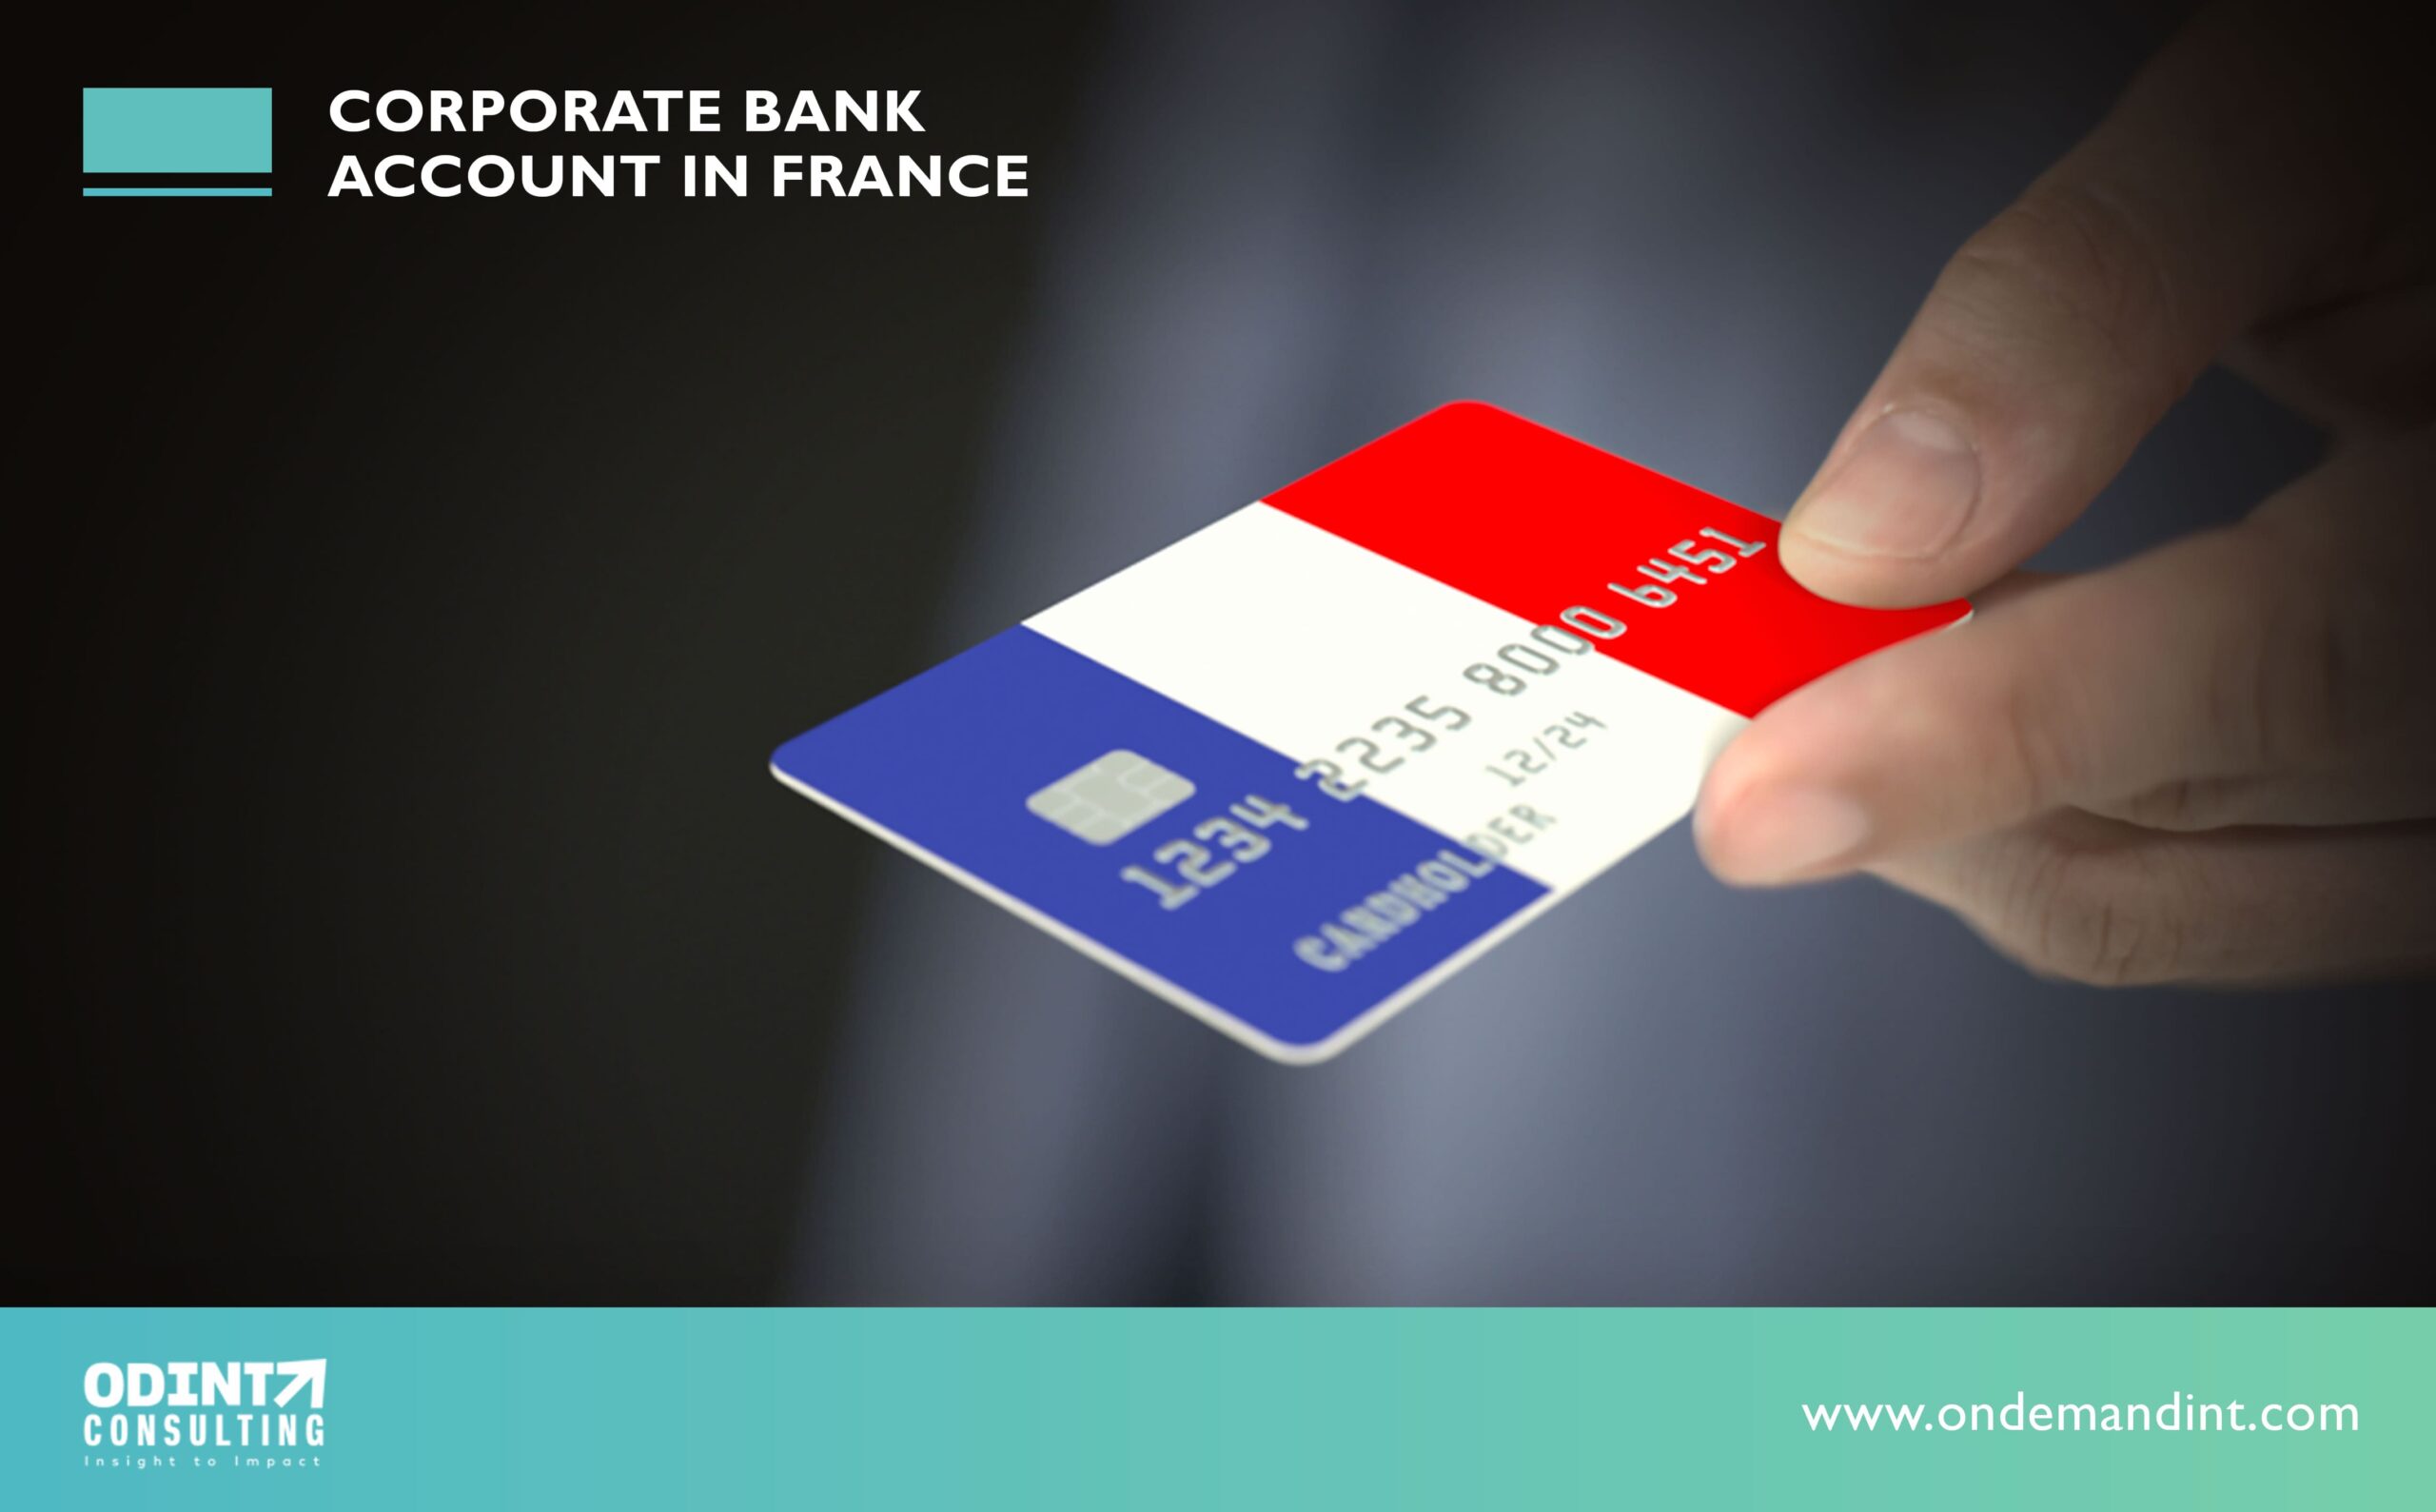 Corporate Bank Account in France: Requirements, Documents & Procedures